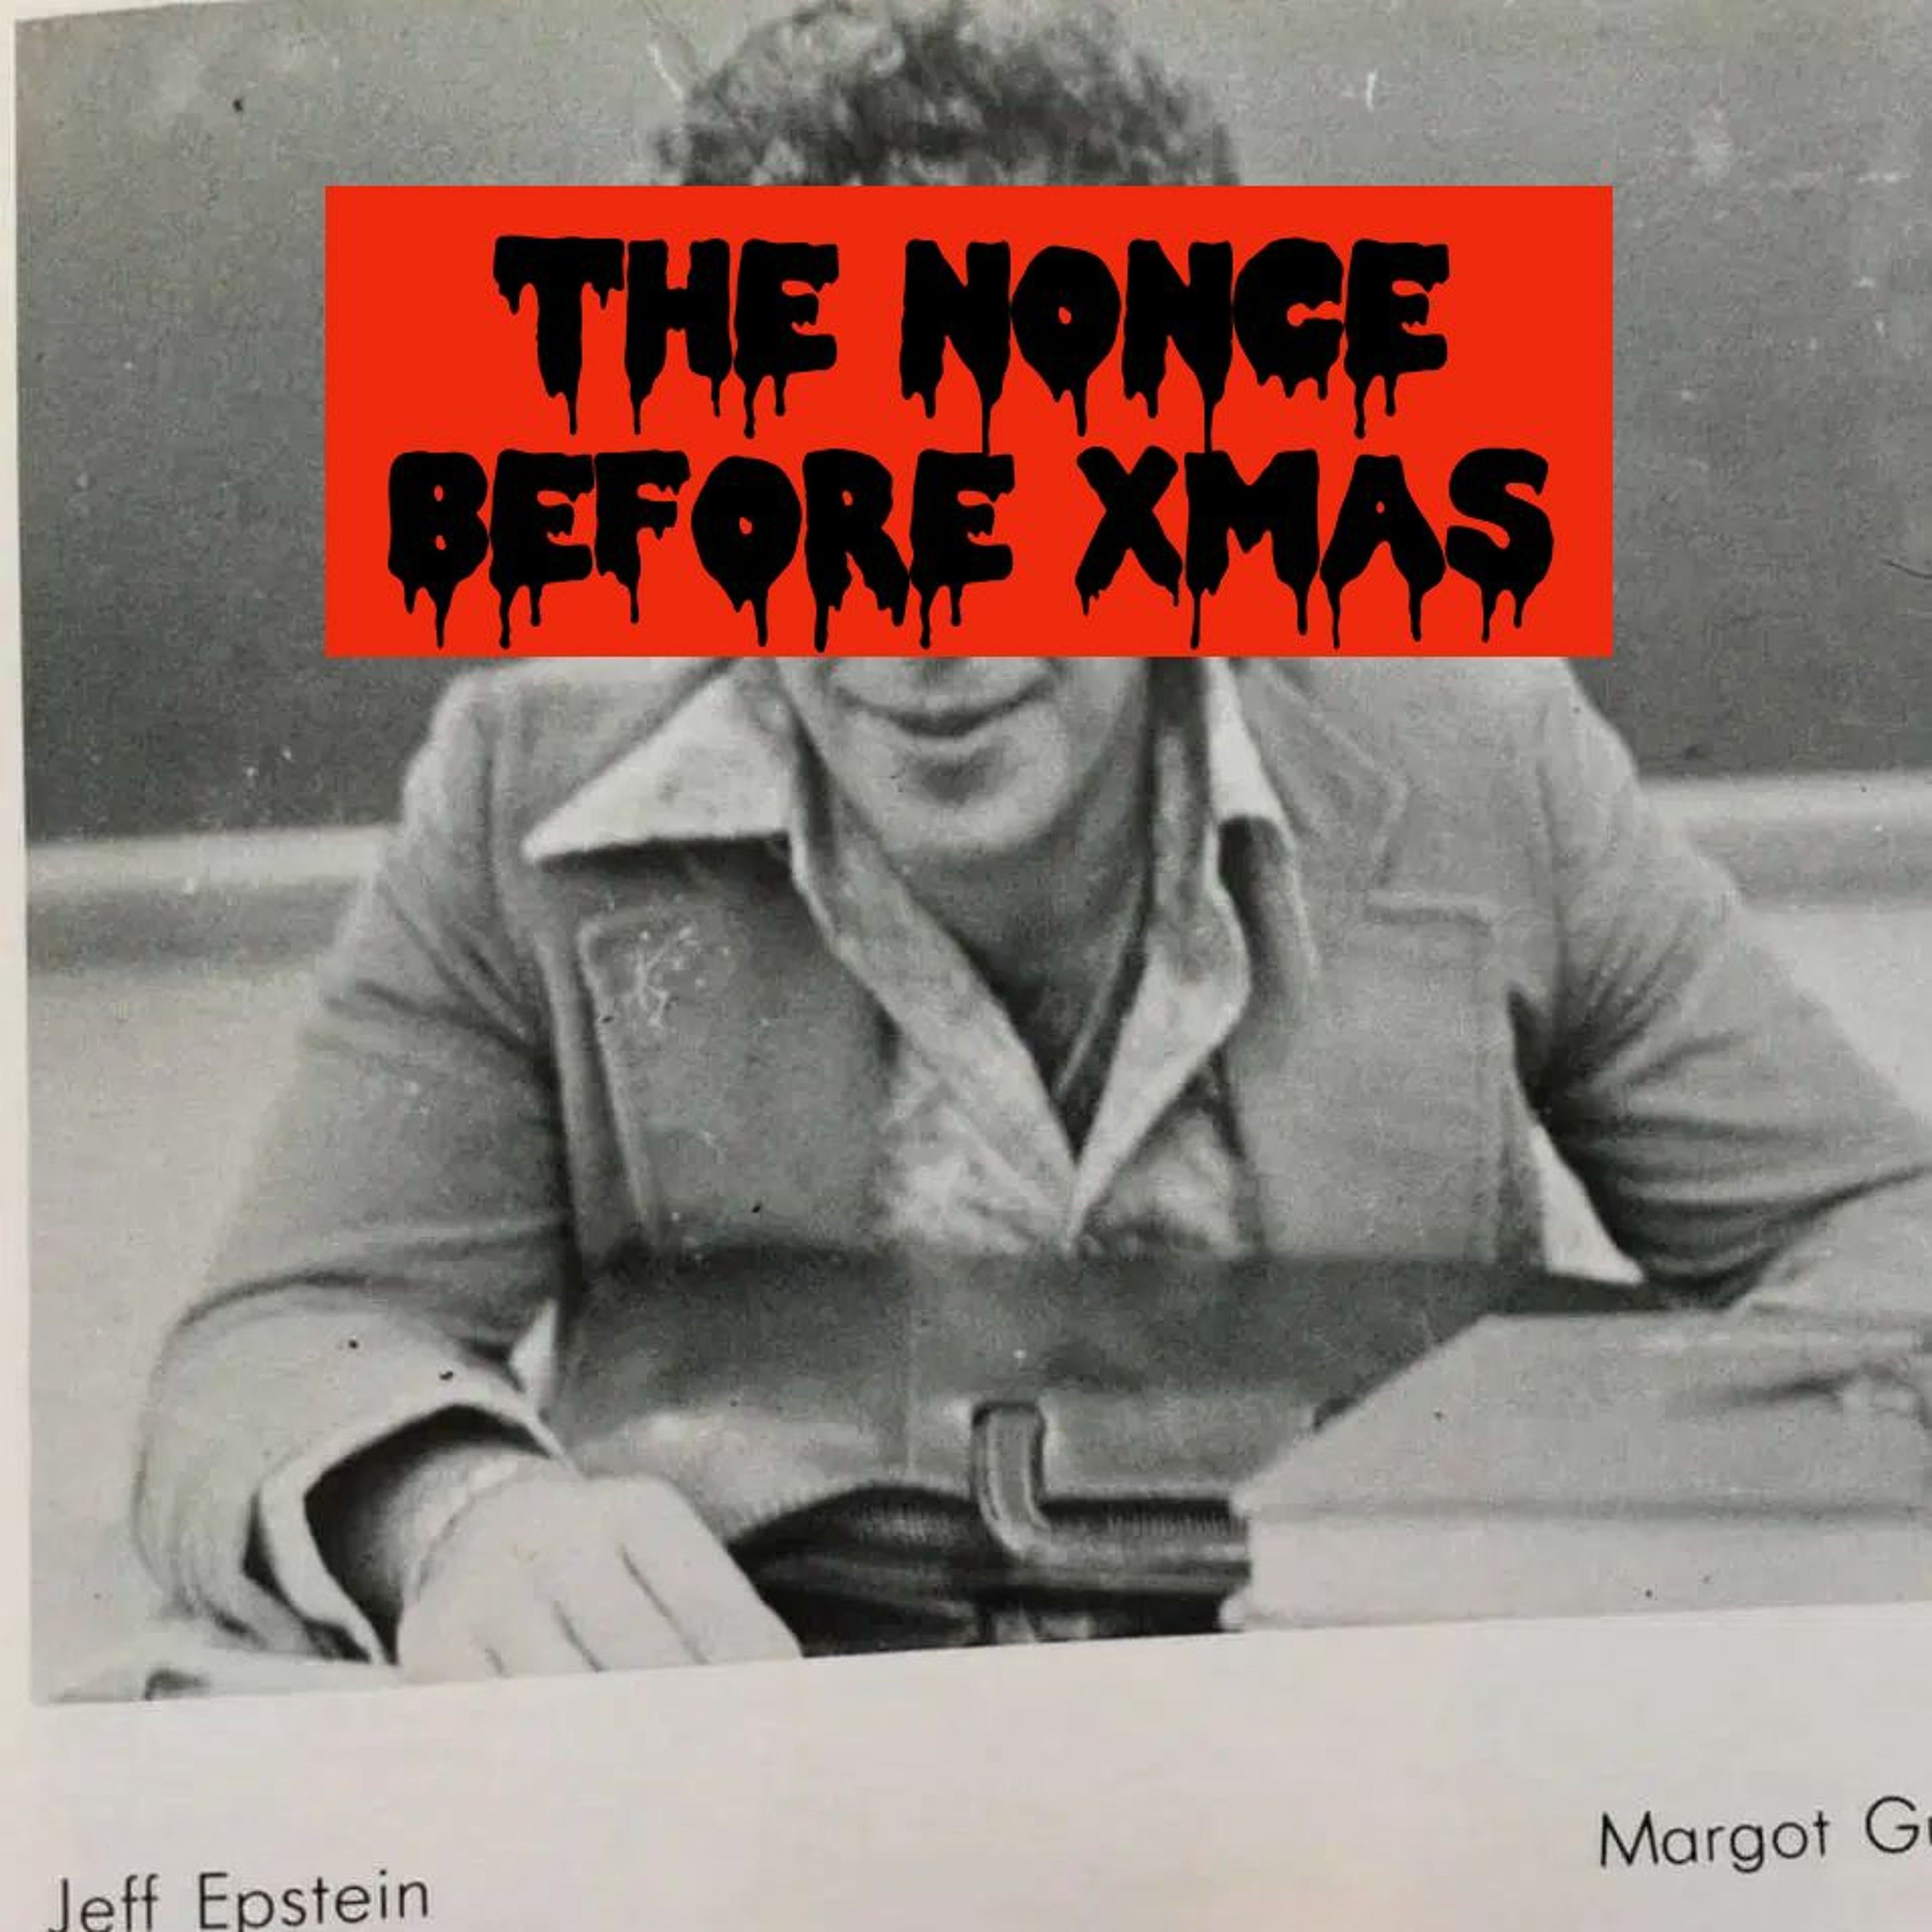 Episode 32: The Nonce Before Xmas (teaser)